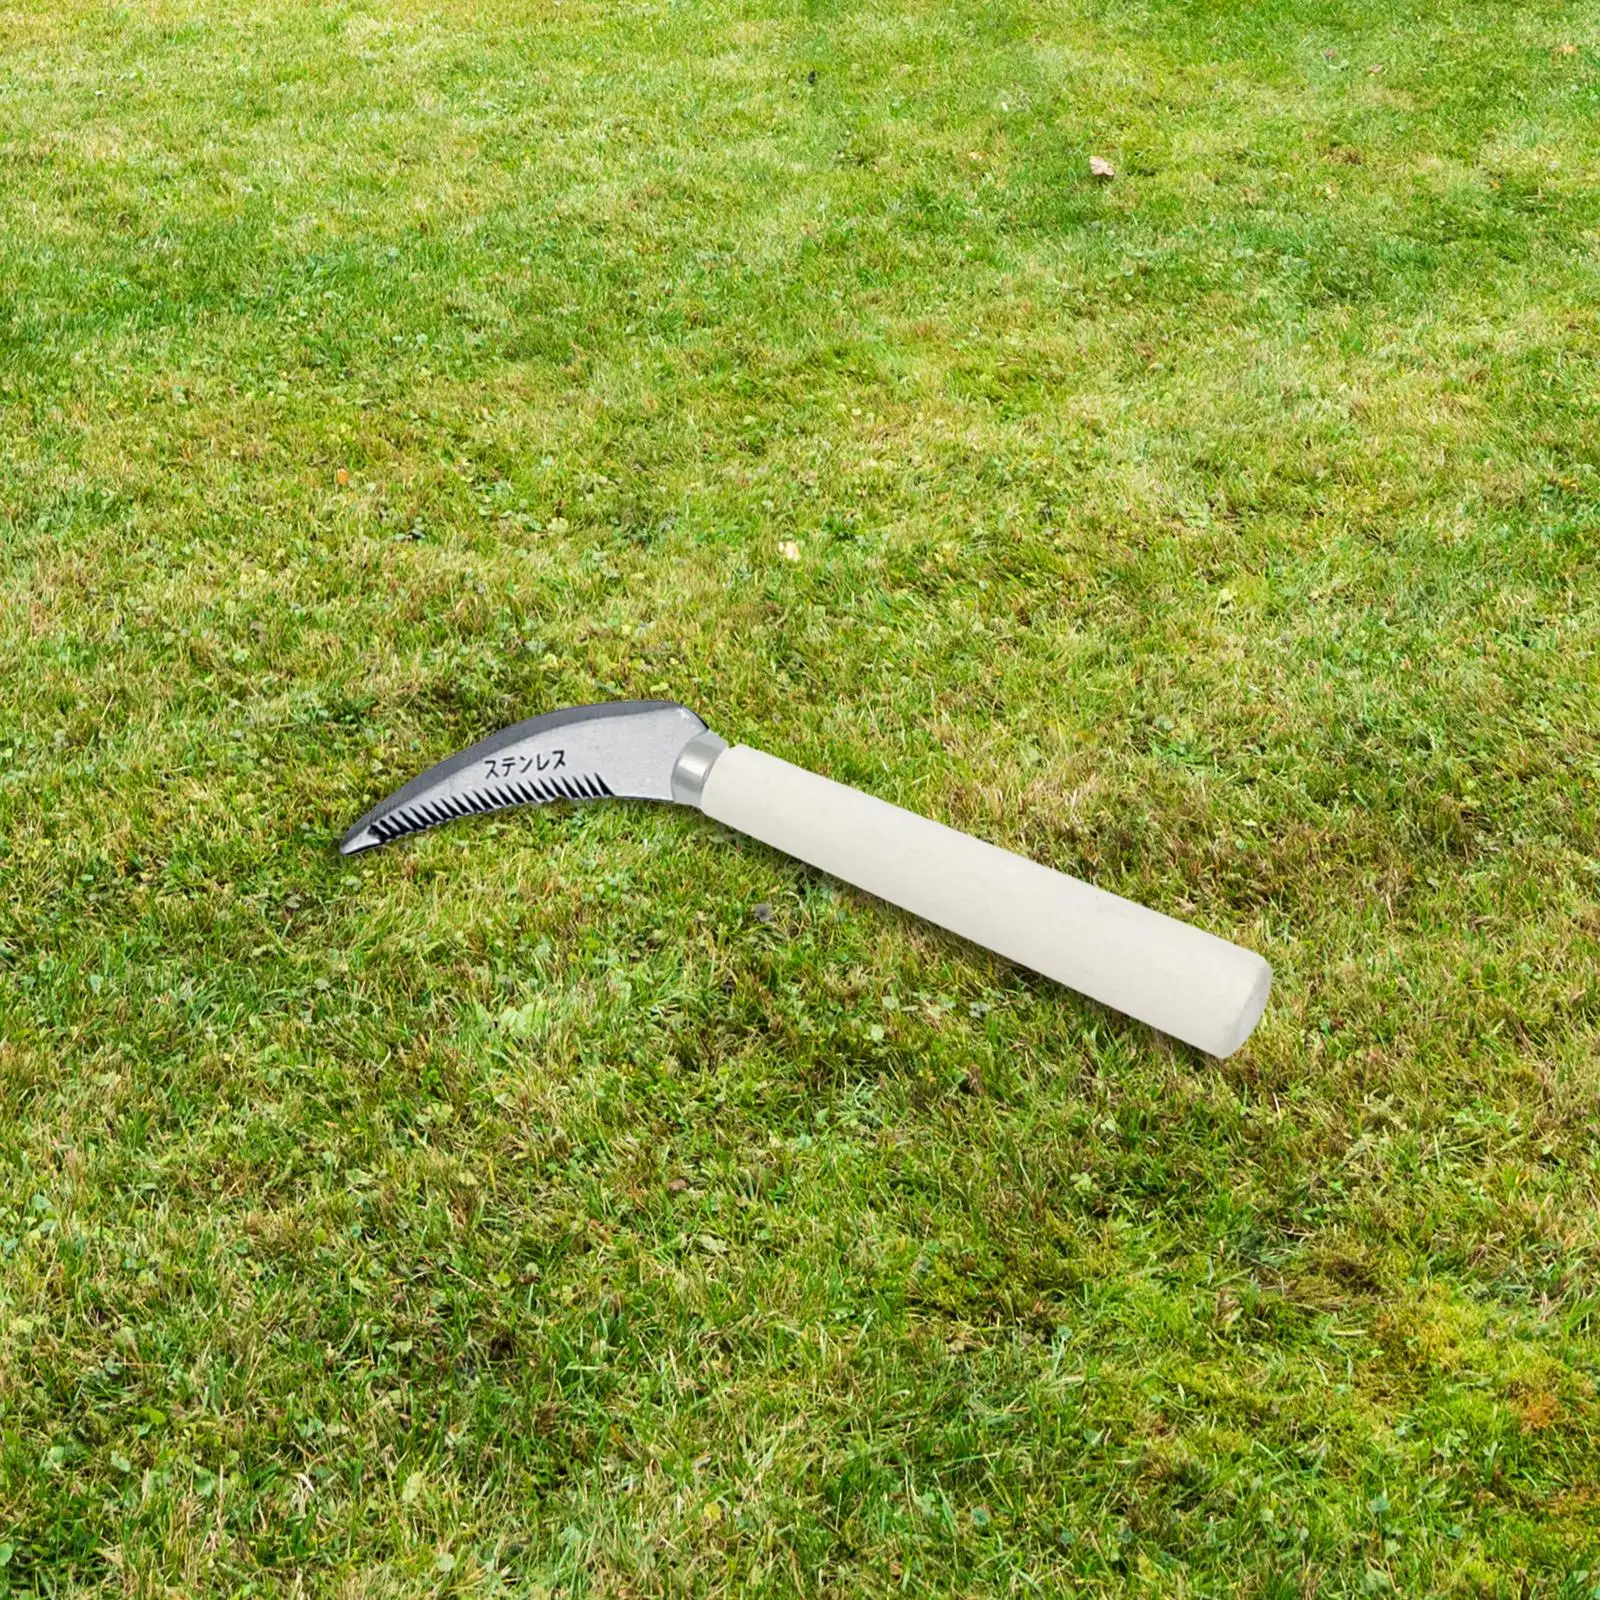 Gardening Sickle Gardening Hand Tools Weeding Removal Tool Grass Weeding Knife for Garden Terrace Paving Patio Driveway